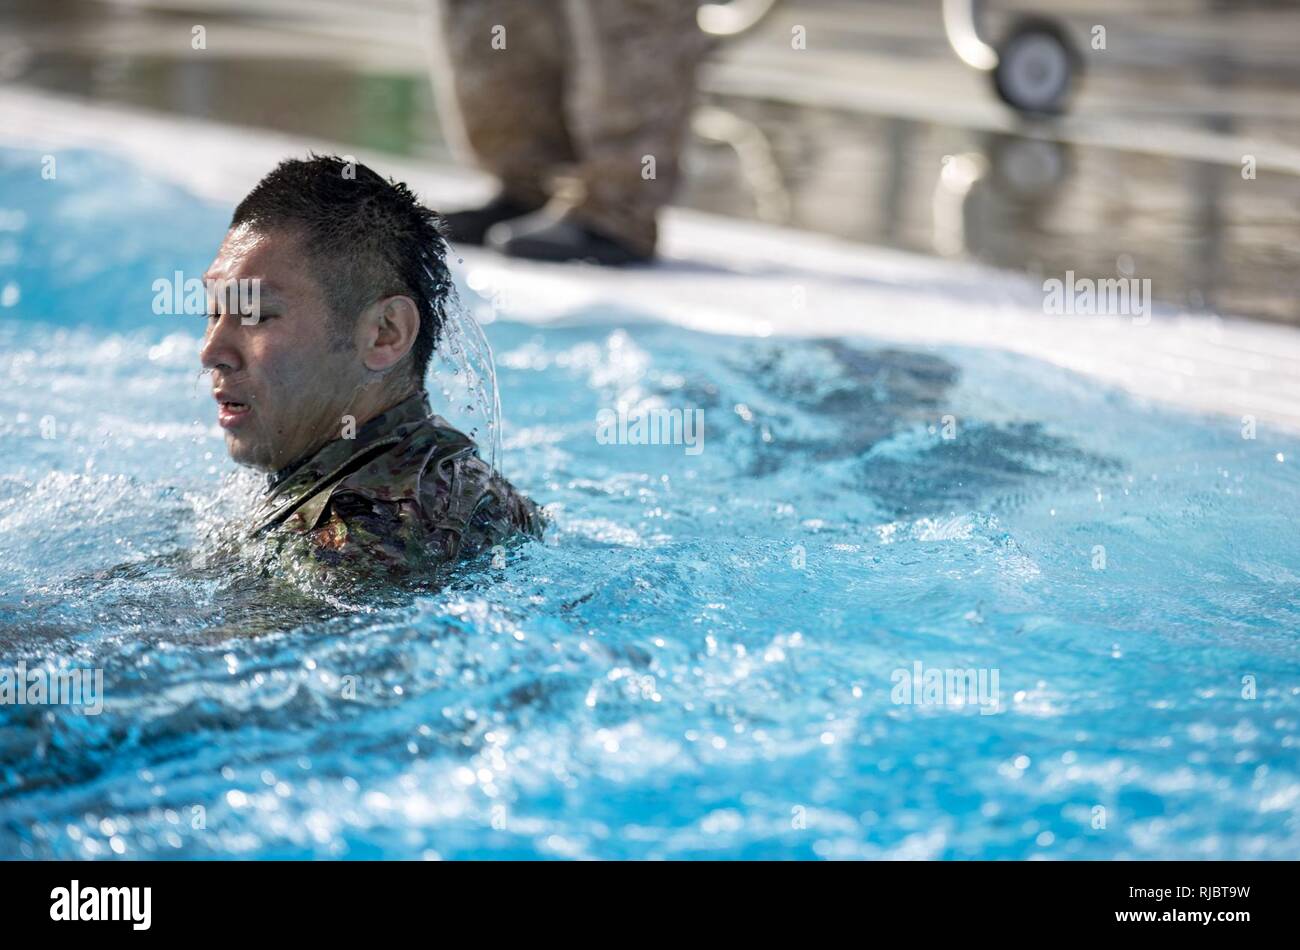 MARINE CORPS BASE CAMP PENDLETON, Calif. – A Japan Ground Self Defense Force Soldier participates in a Marine Corps intermediate swim qualification as part of exercise Iron Fist Jan. 16, 2018. Iron Fist brings together U.S. Marines from the 11th Marine Expeditionary Unit and Soldiers from the Japan Ground Self Defense Force, Western Army Infantry Regiment, to improve bilateral planning, communicating, and conduct combined amphibious operations. Stock Photo